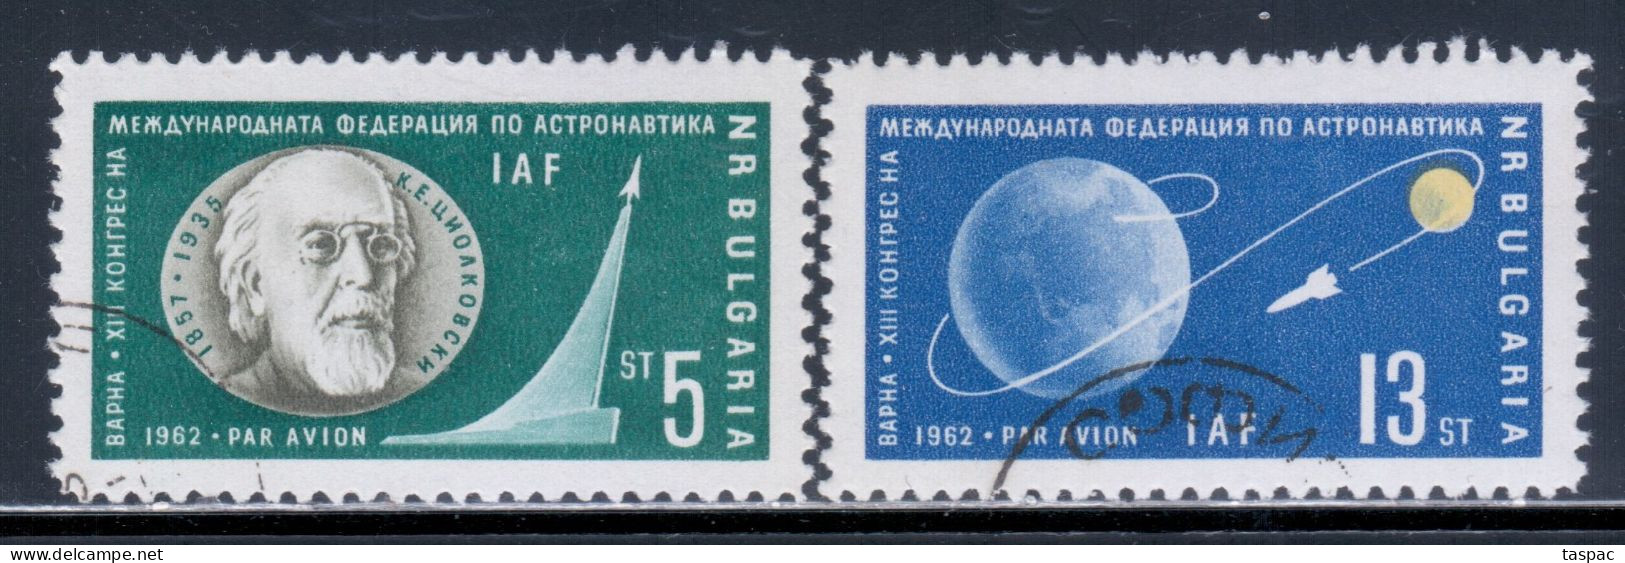 Bulgaria 1962 Mi# 1347-1348 Used - 13th Meeting Of The International Astronautical Federation / Space - Europe